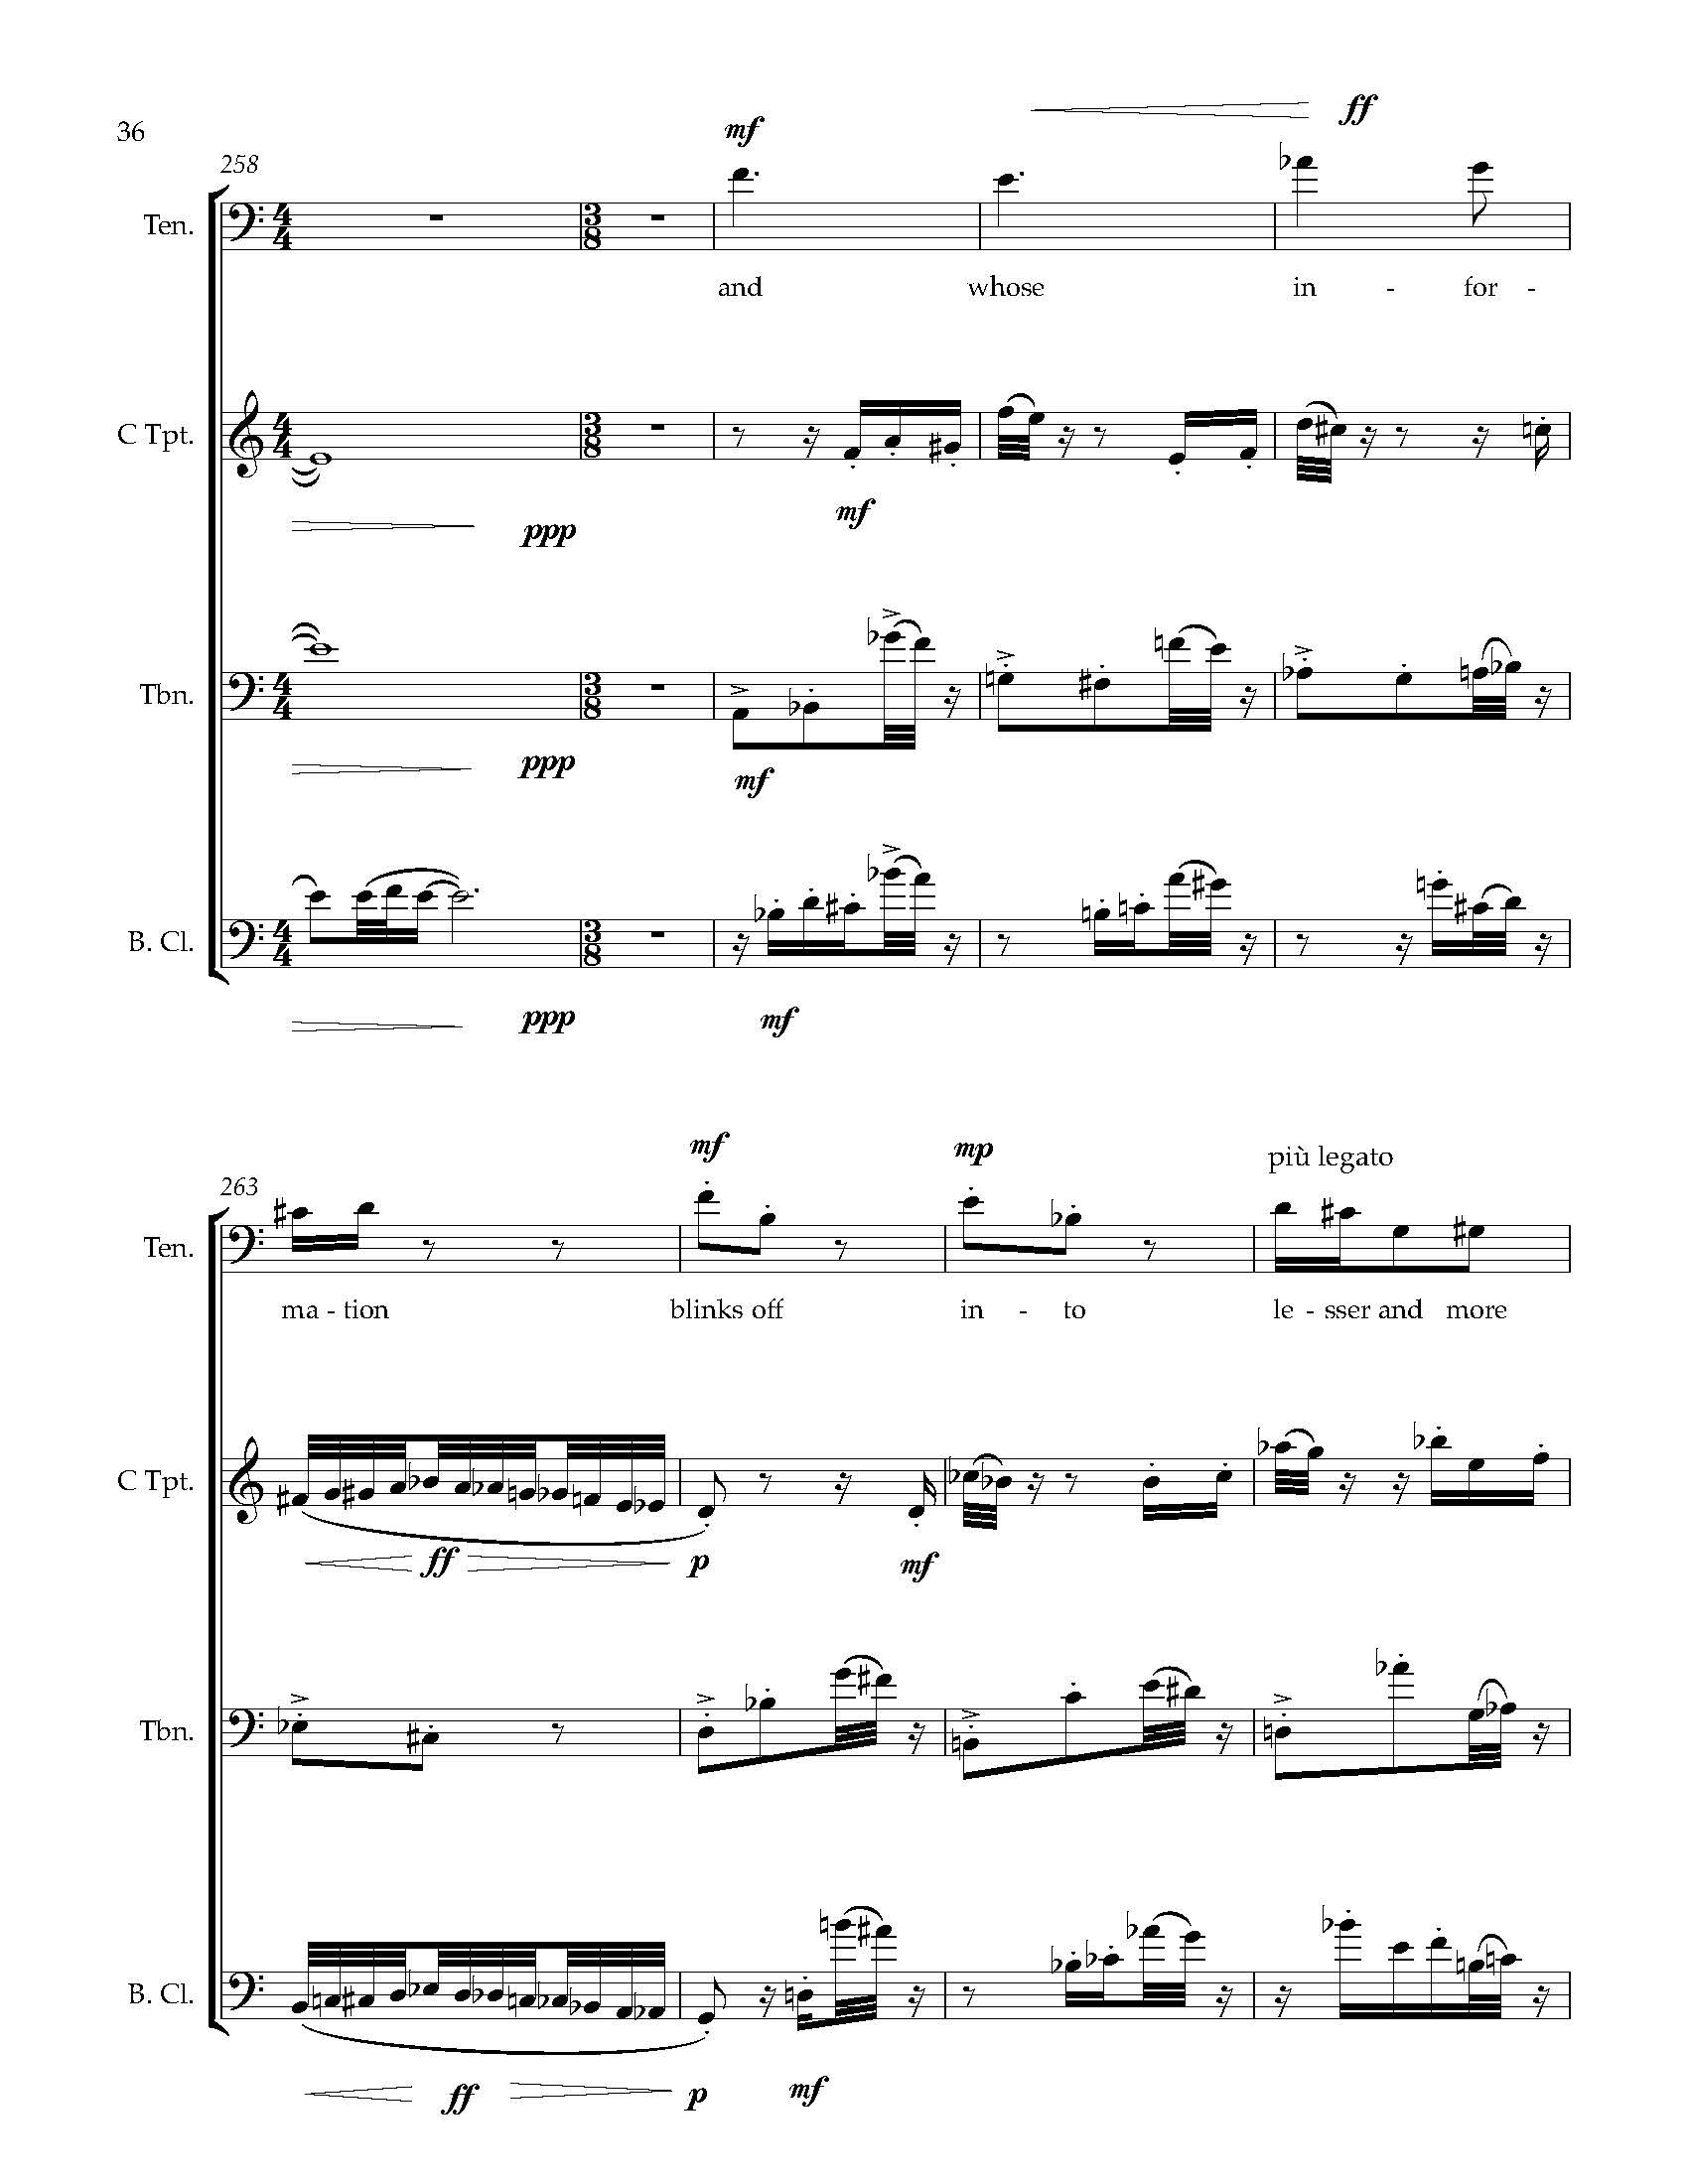 Many Worlds [1] - Complete Score_Page_45.jpg